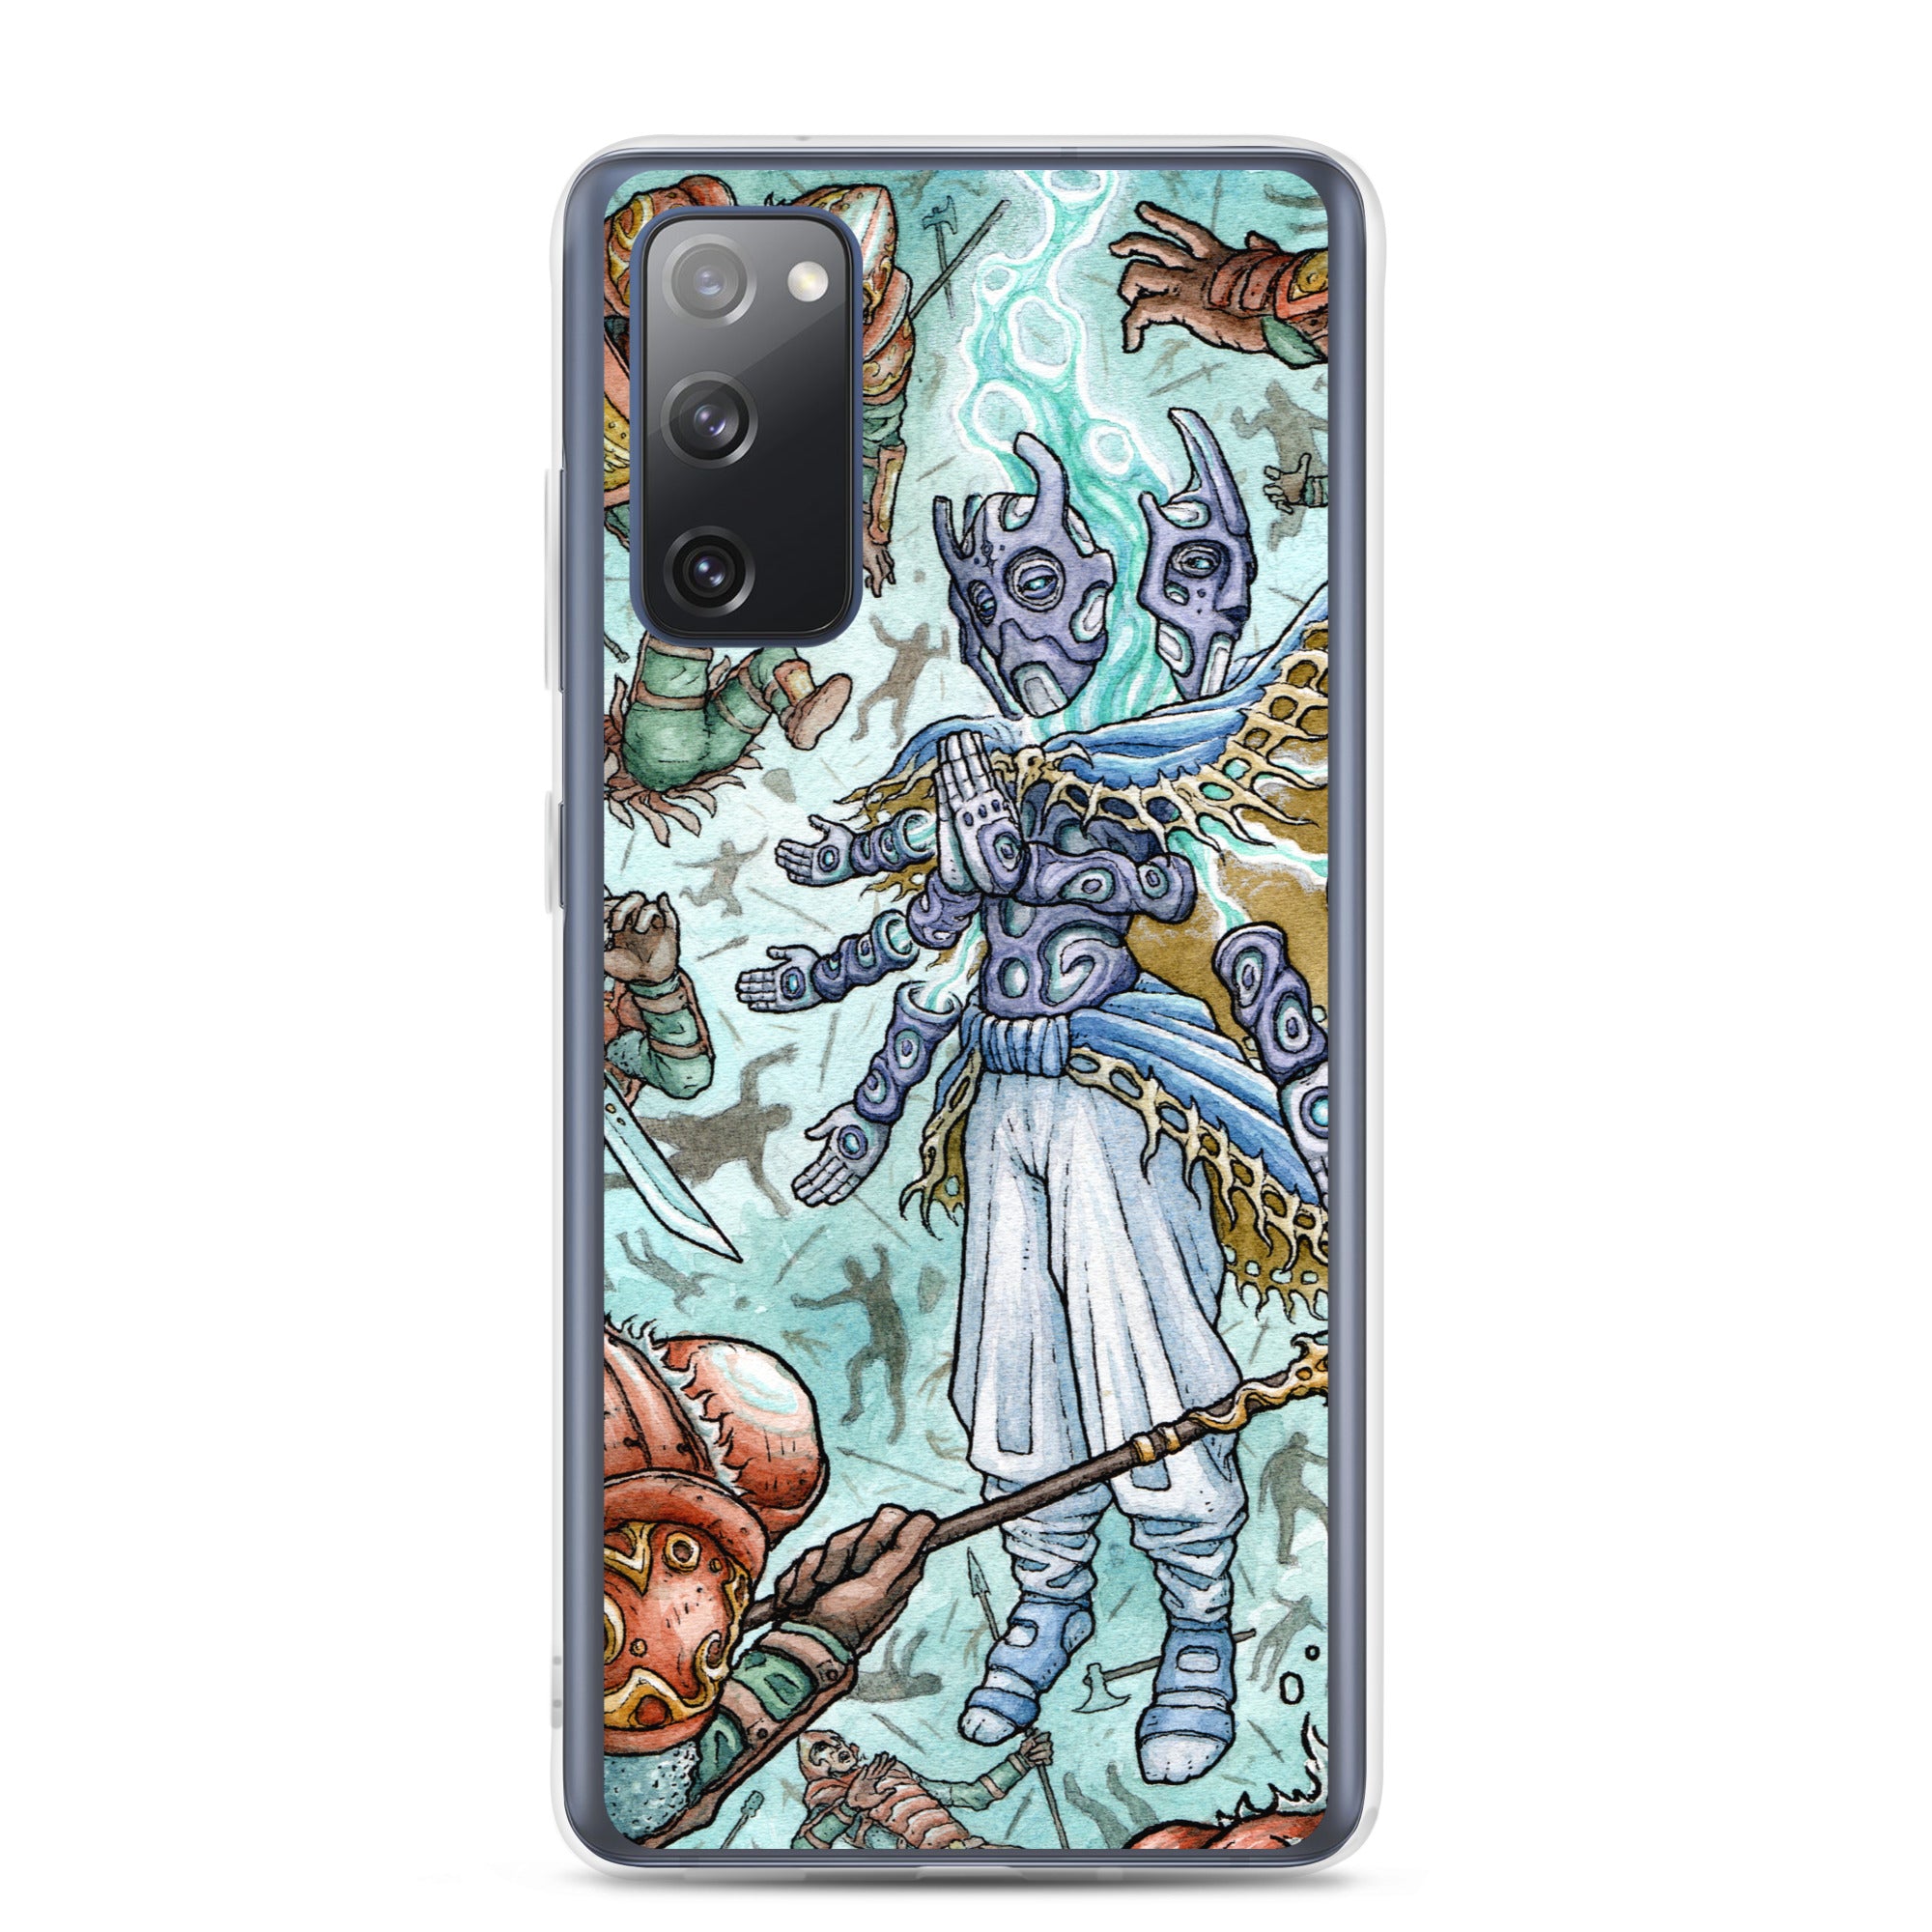 Samsung Case - Annihilation Of The Imperial Army